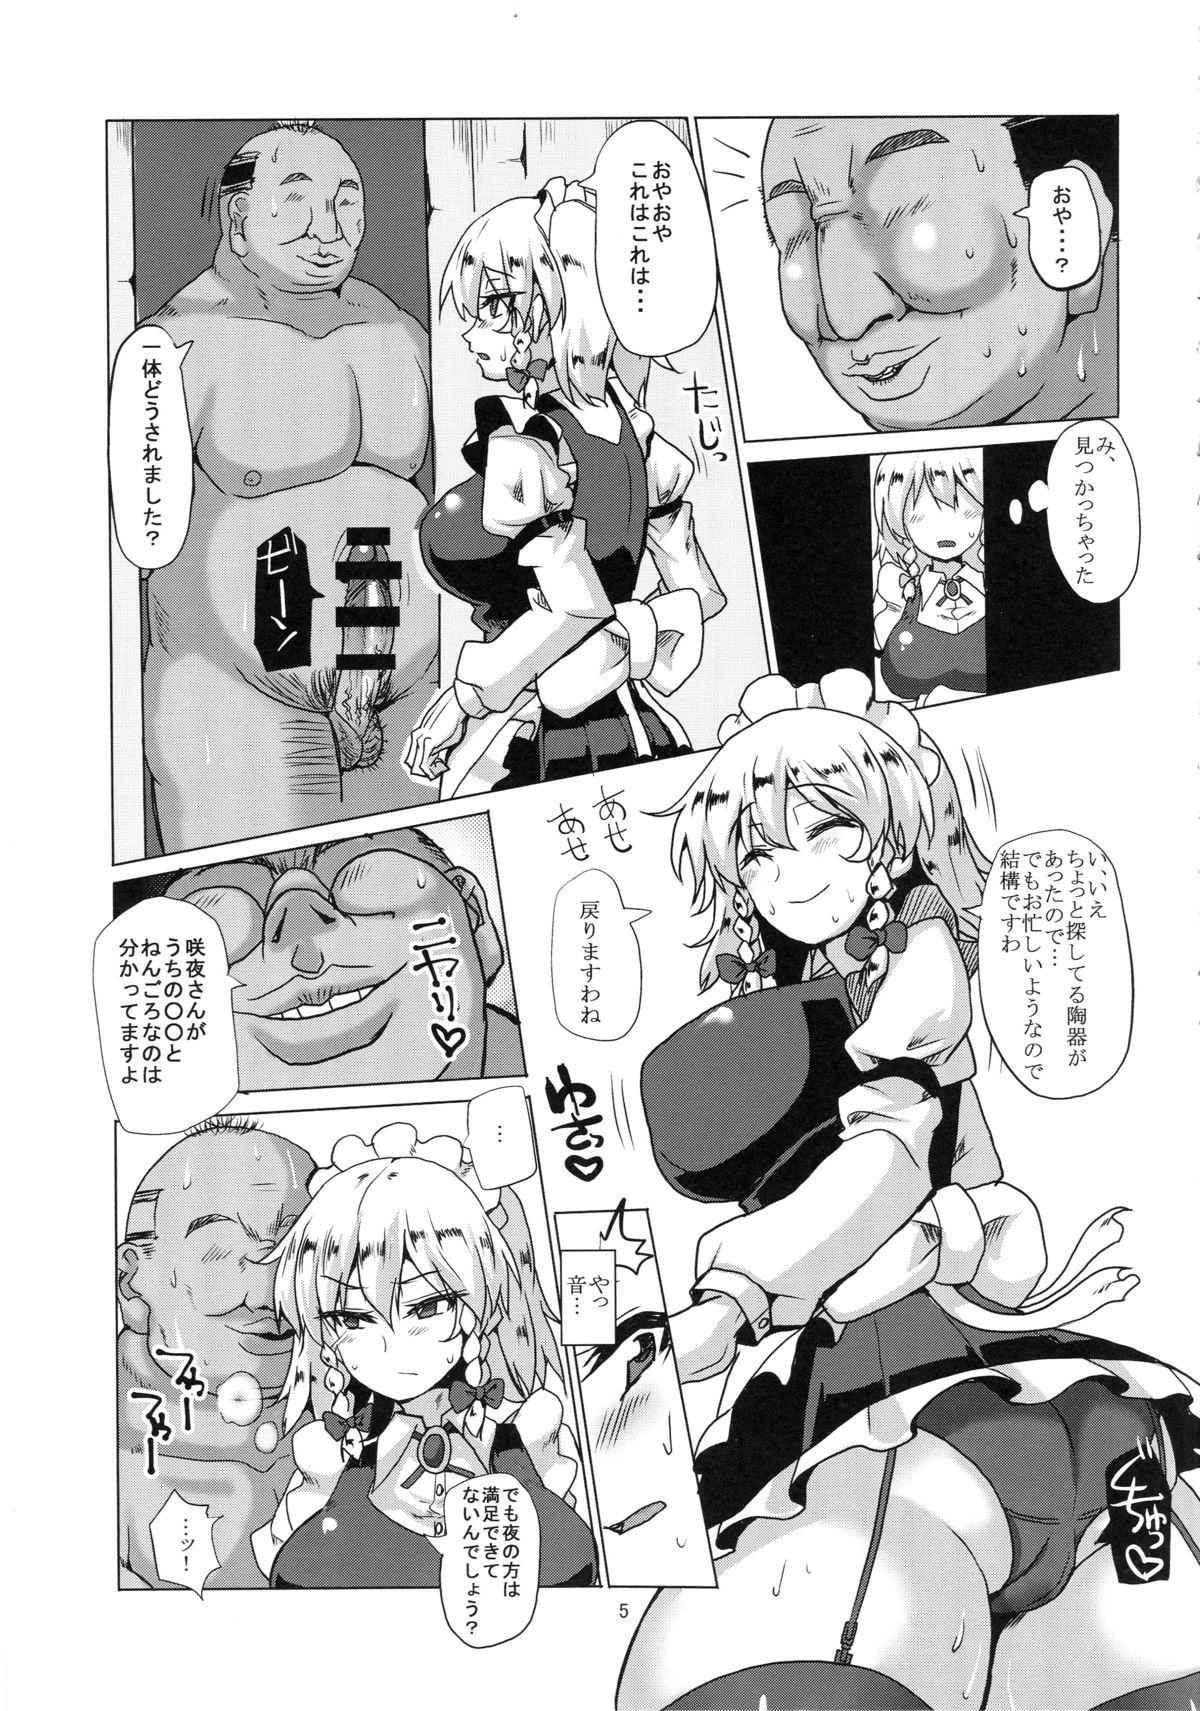 Lingerie Netorare Maid - Touhou project Huge Boobs - Page 6